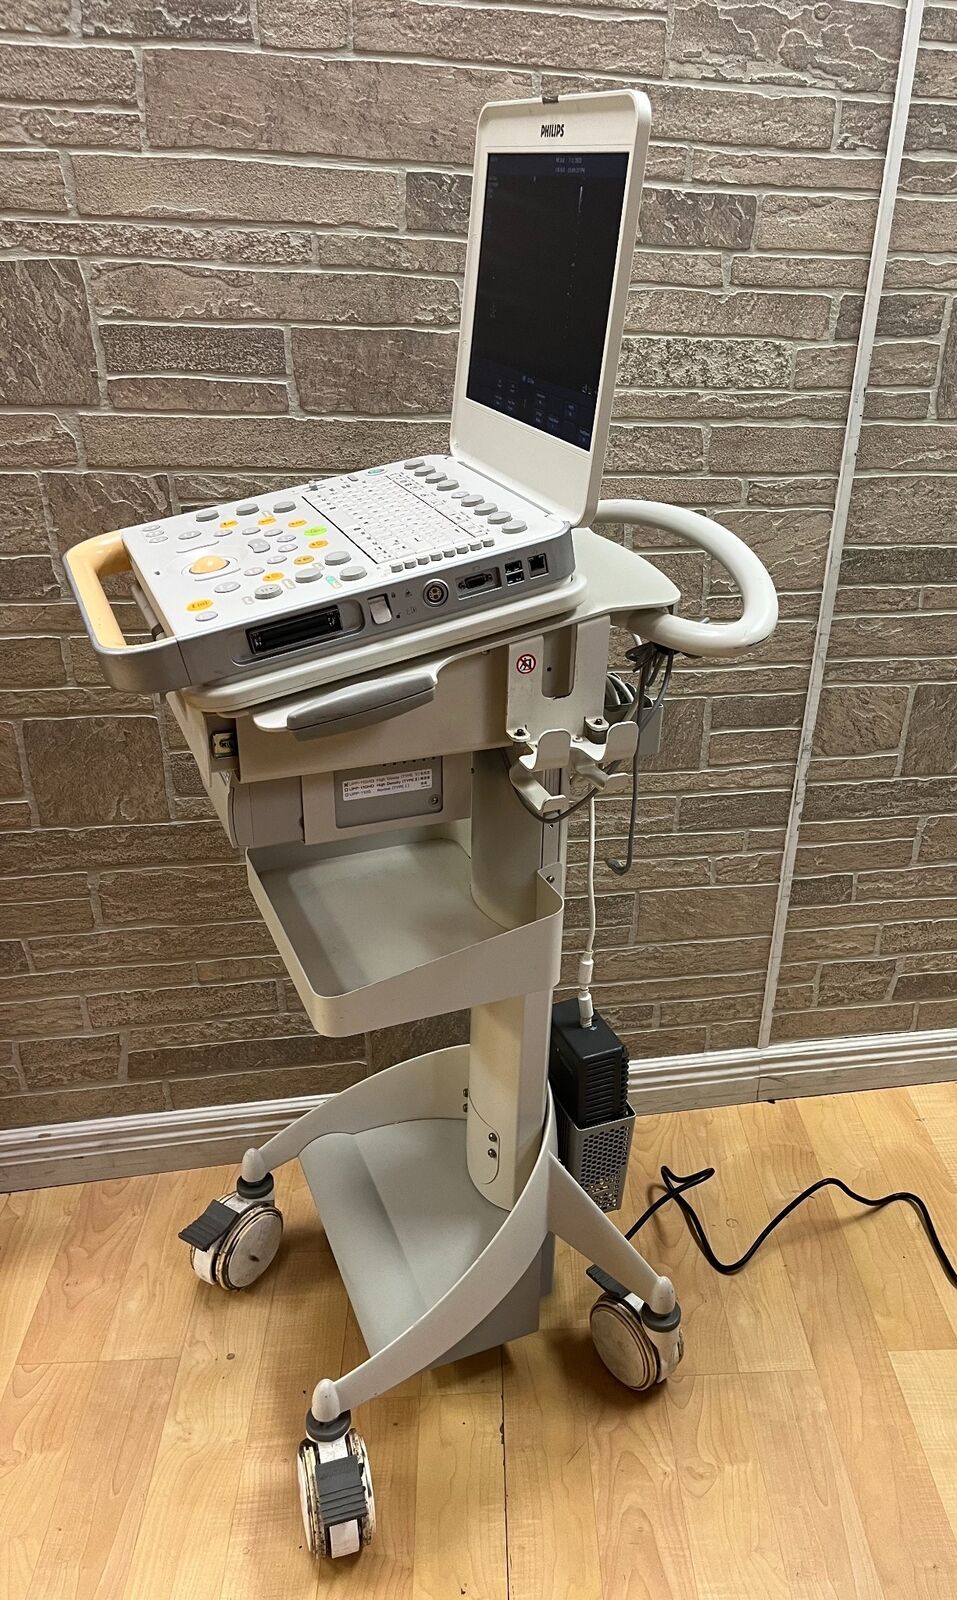 Philips CX50 Ultrasound Scanner Machine 2011 with cart and Linear Probe L12-3 DIAGNOSTIC ULTRASOUND MACHINES FOR SALE